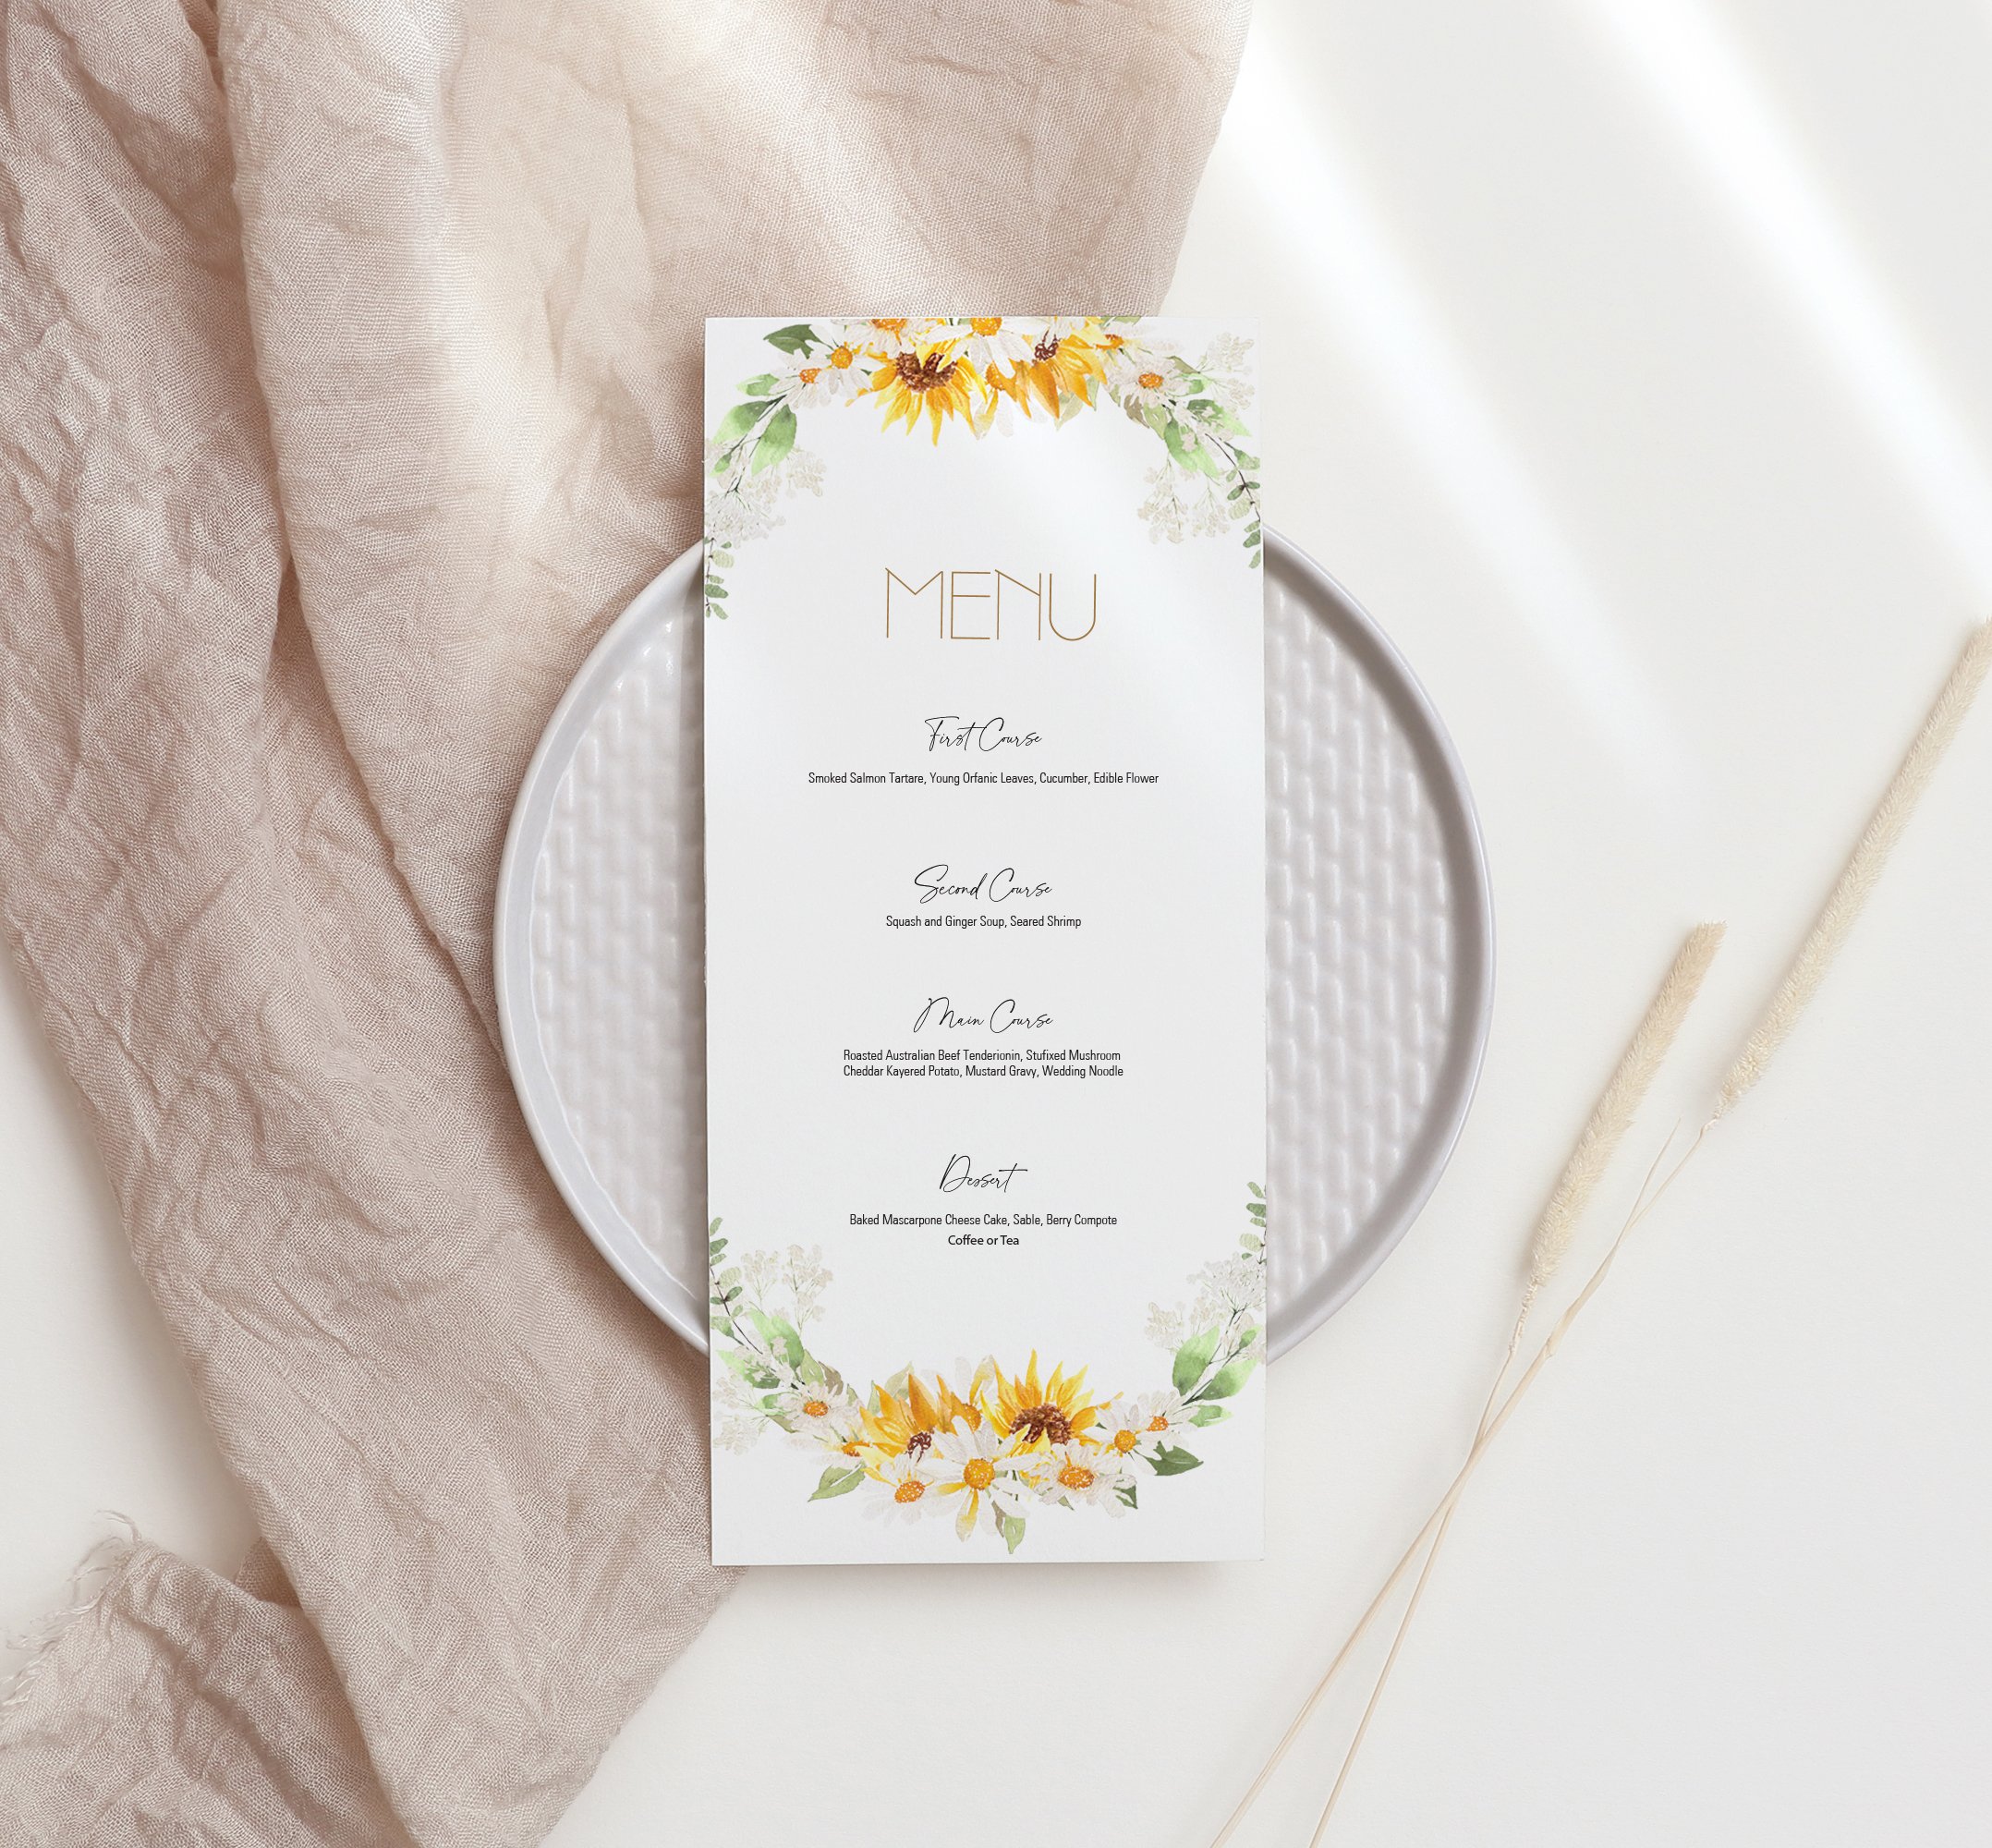 Fresh and interesting menu with flowers.